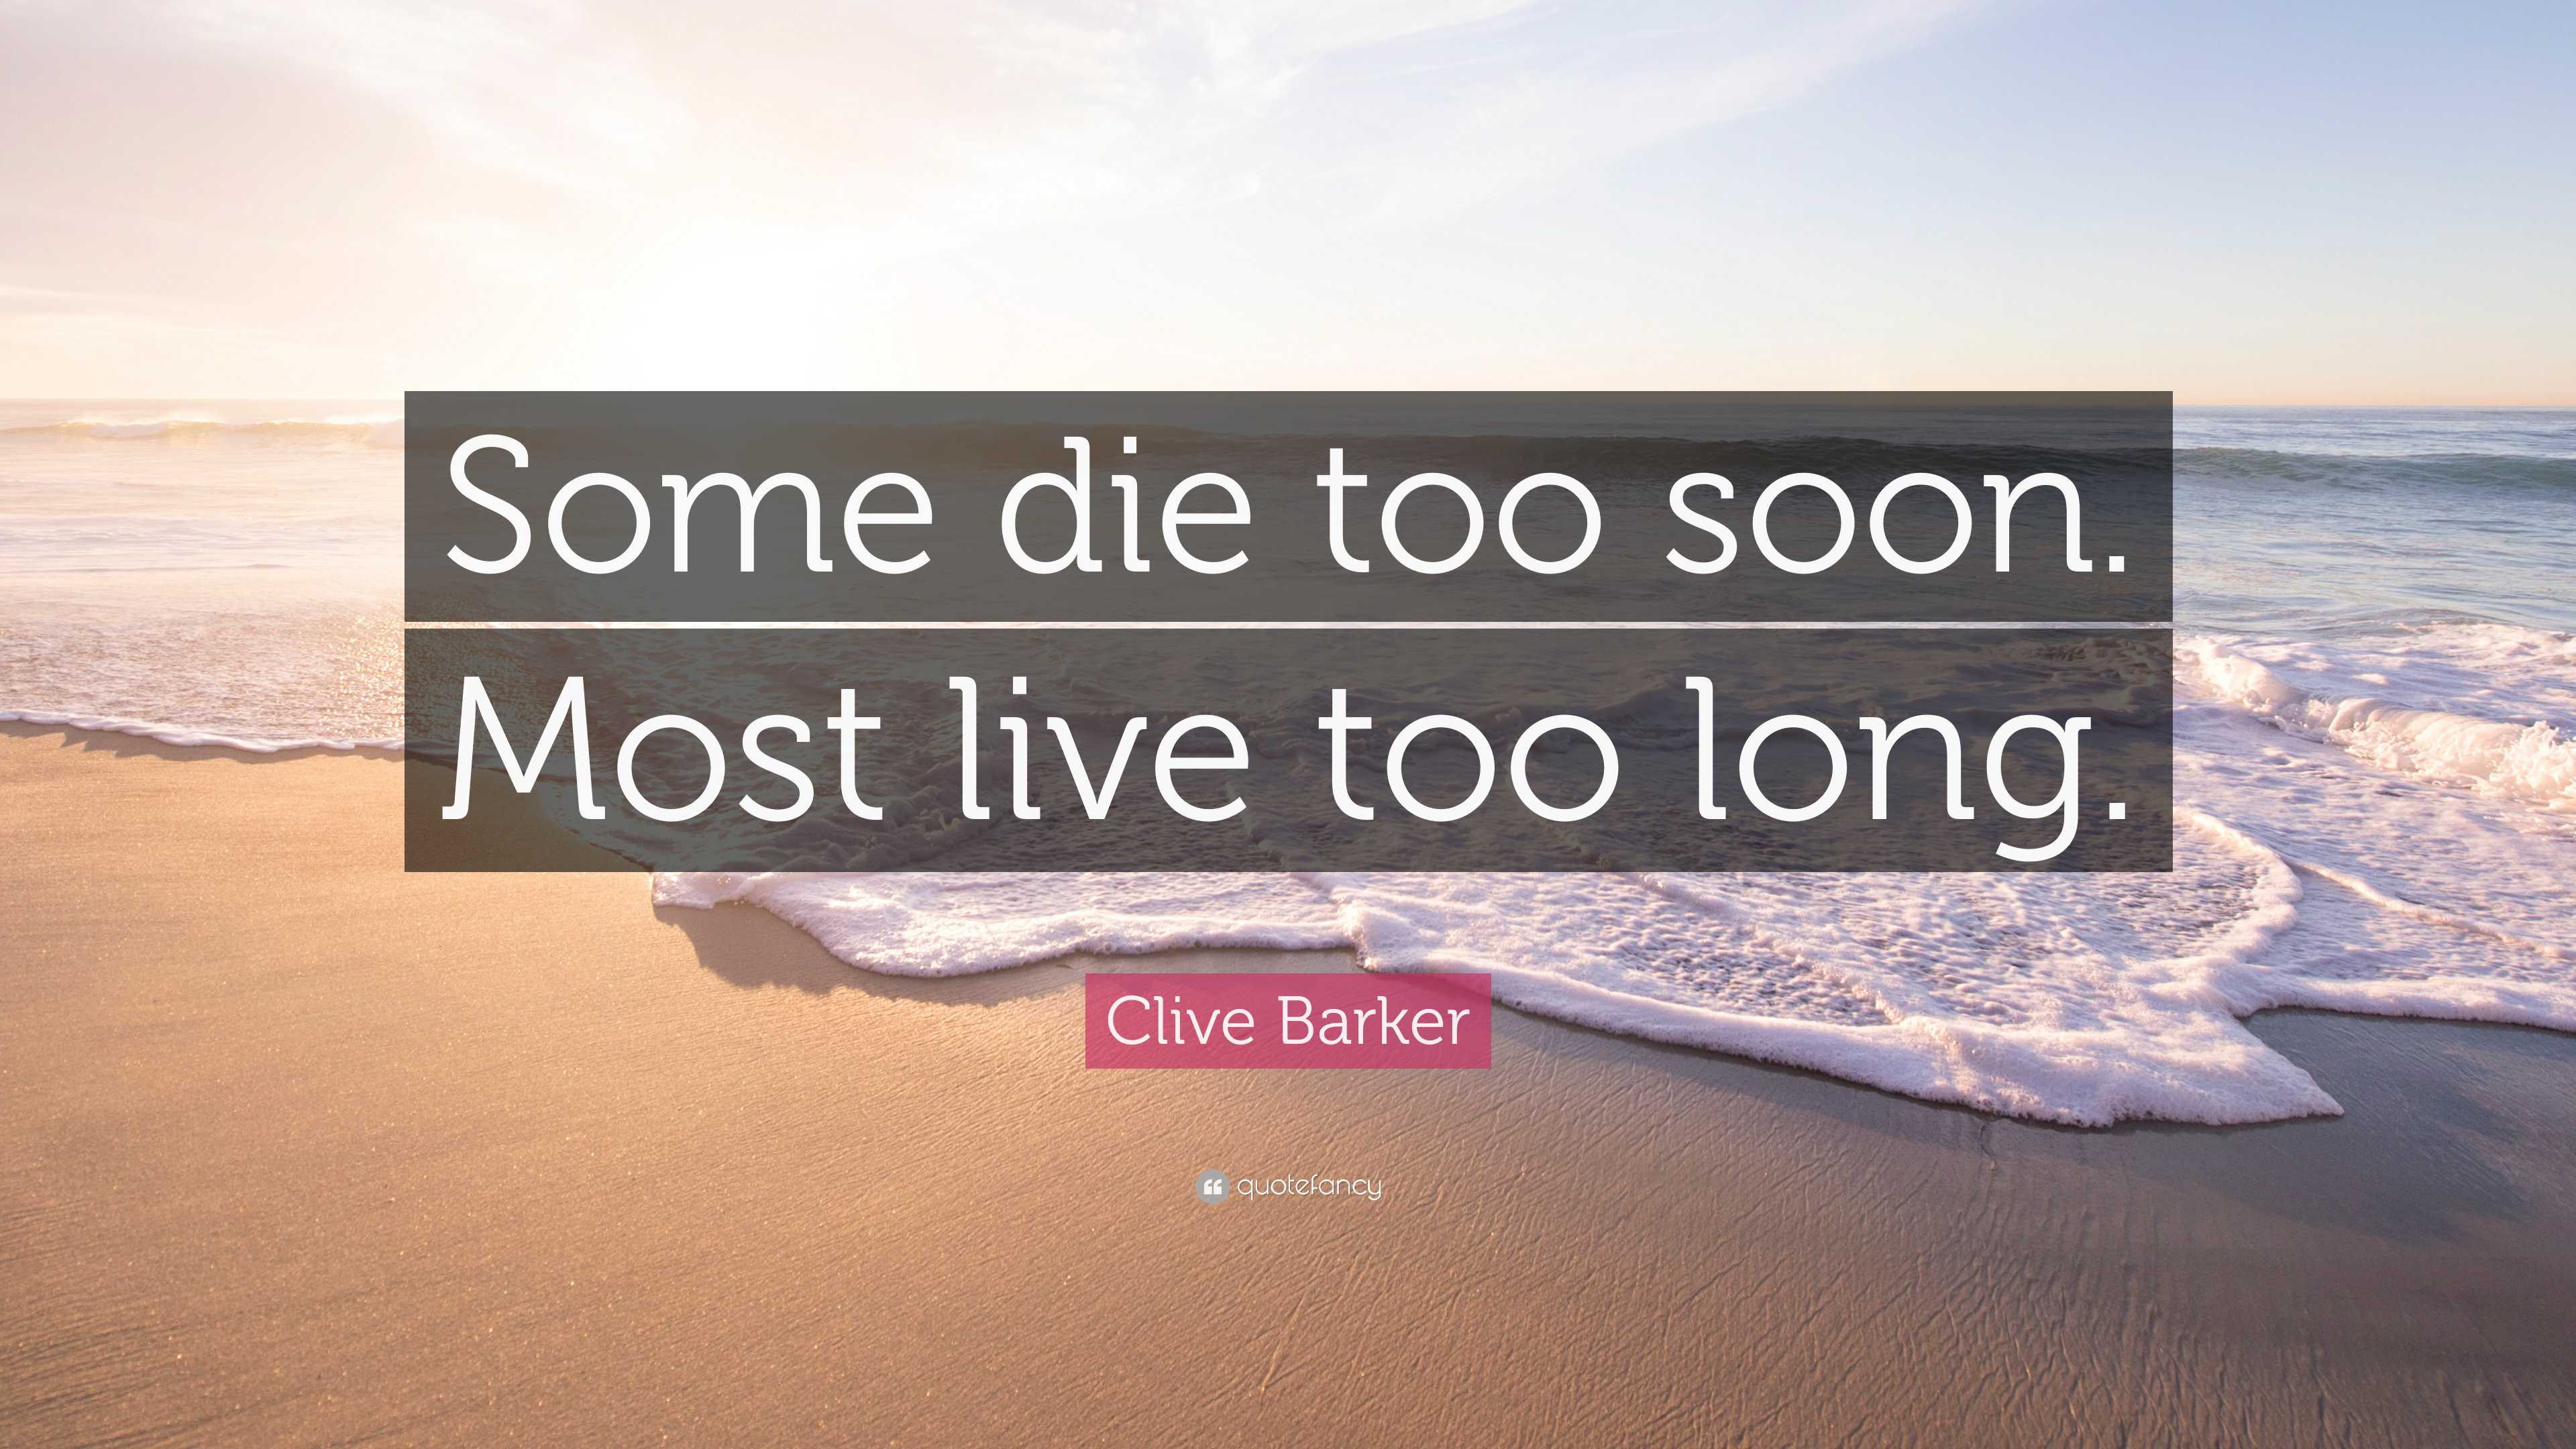 Clive Barker Quote “some Die Too Soon Most Live Too Long” 6395